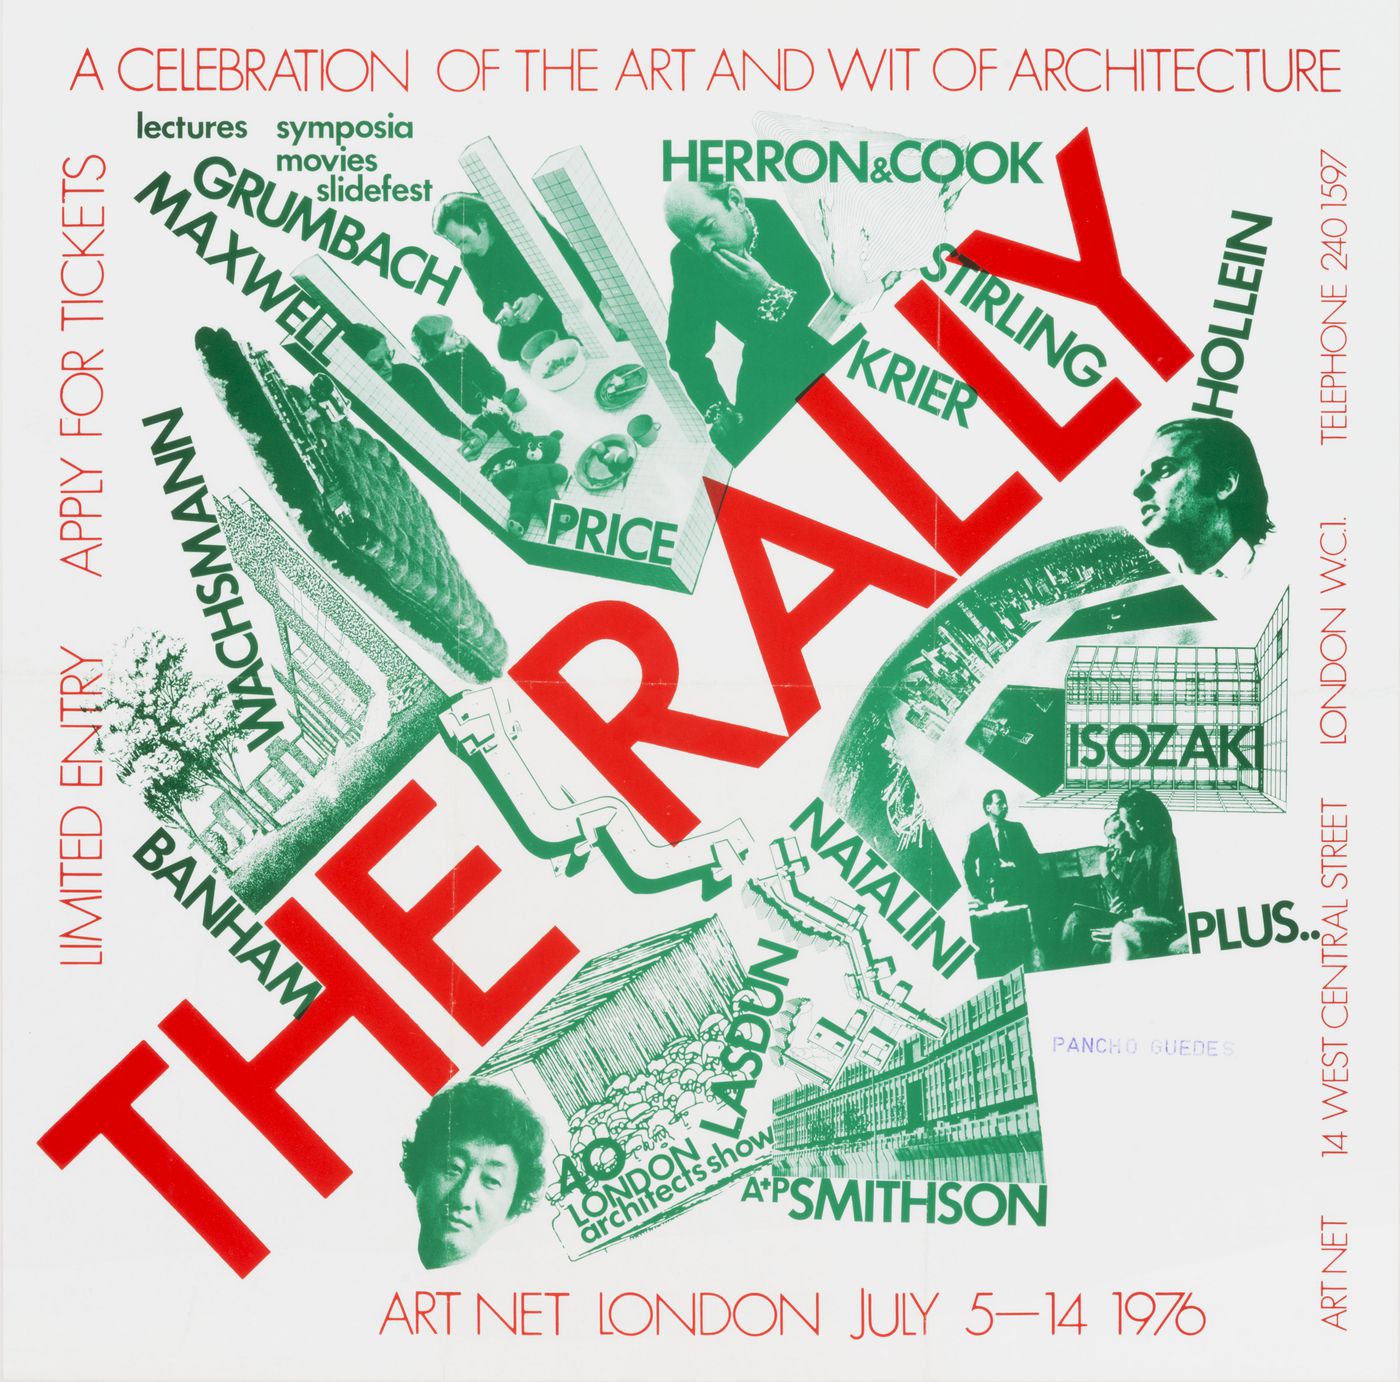 Poster for “The Rally” conference at Art Net